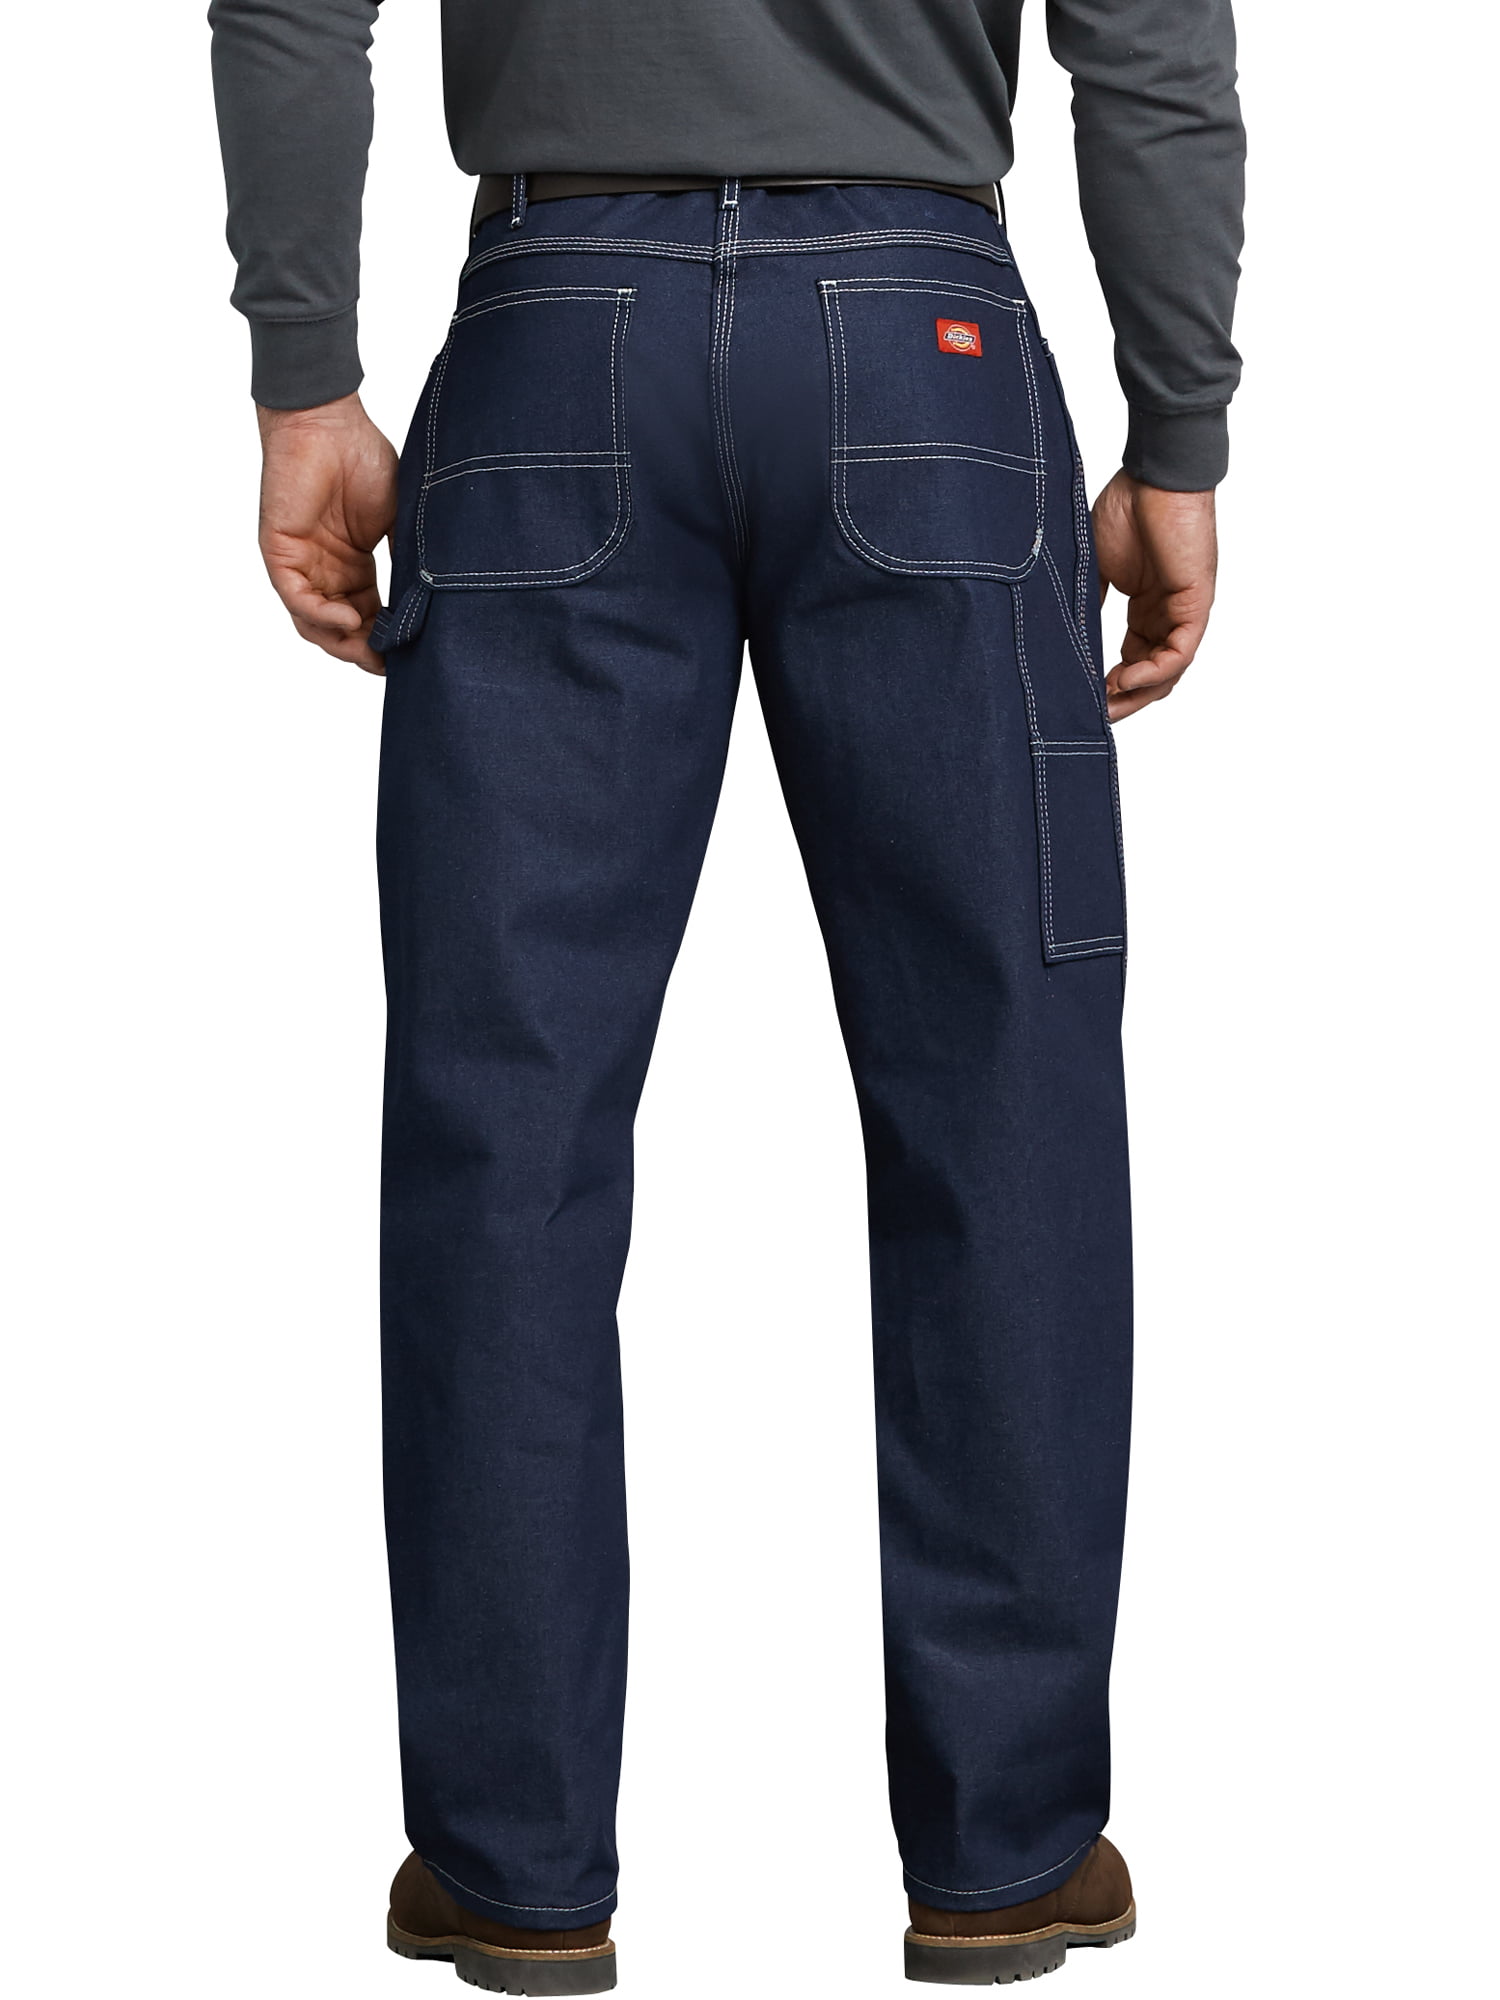 dickies carpenter jeans relaxed fit straight leg